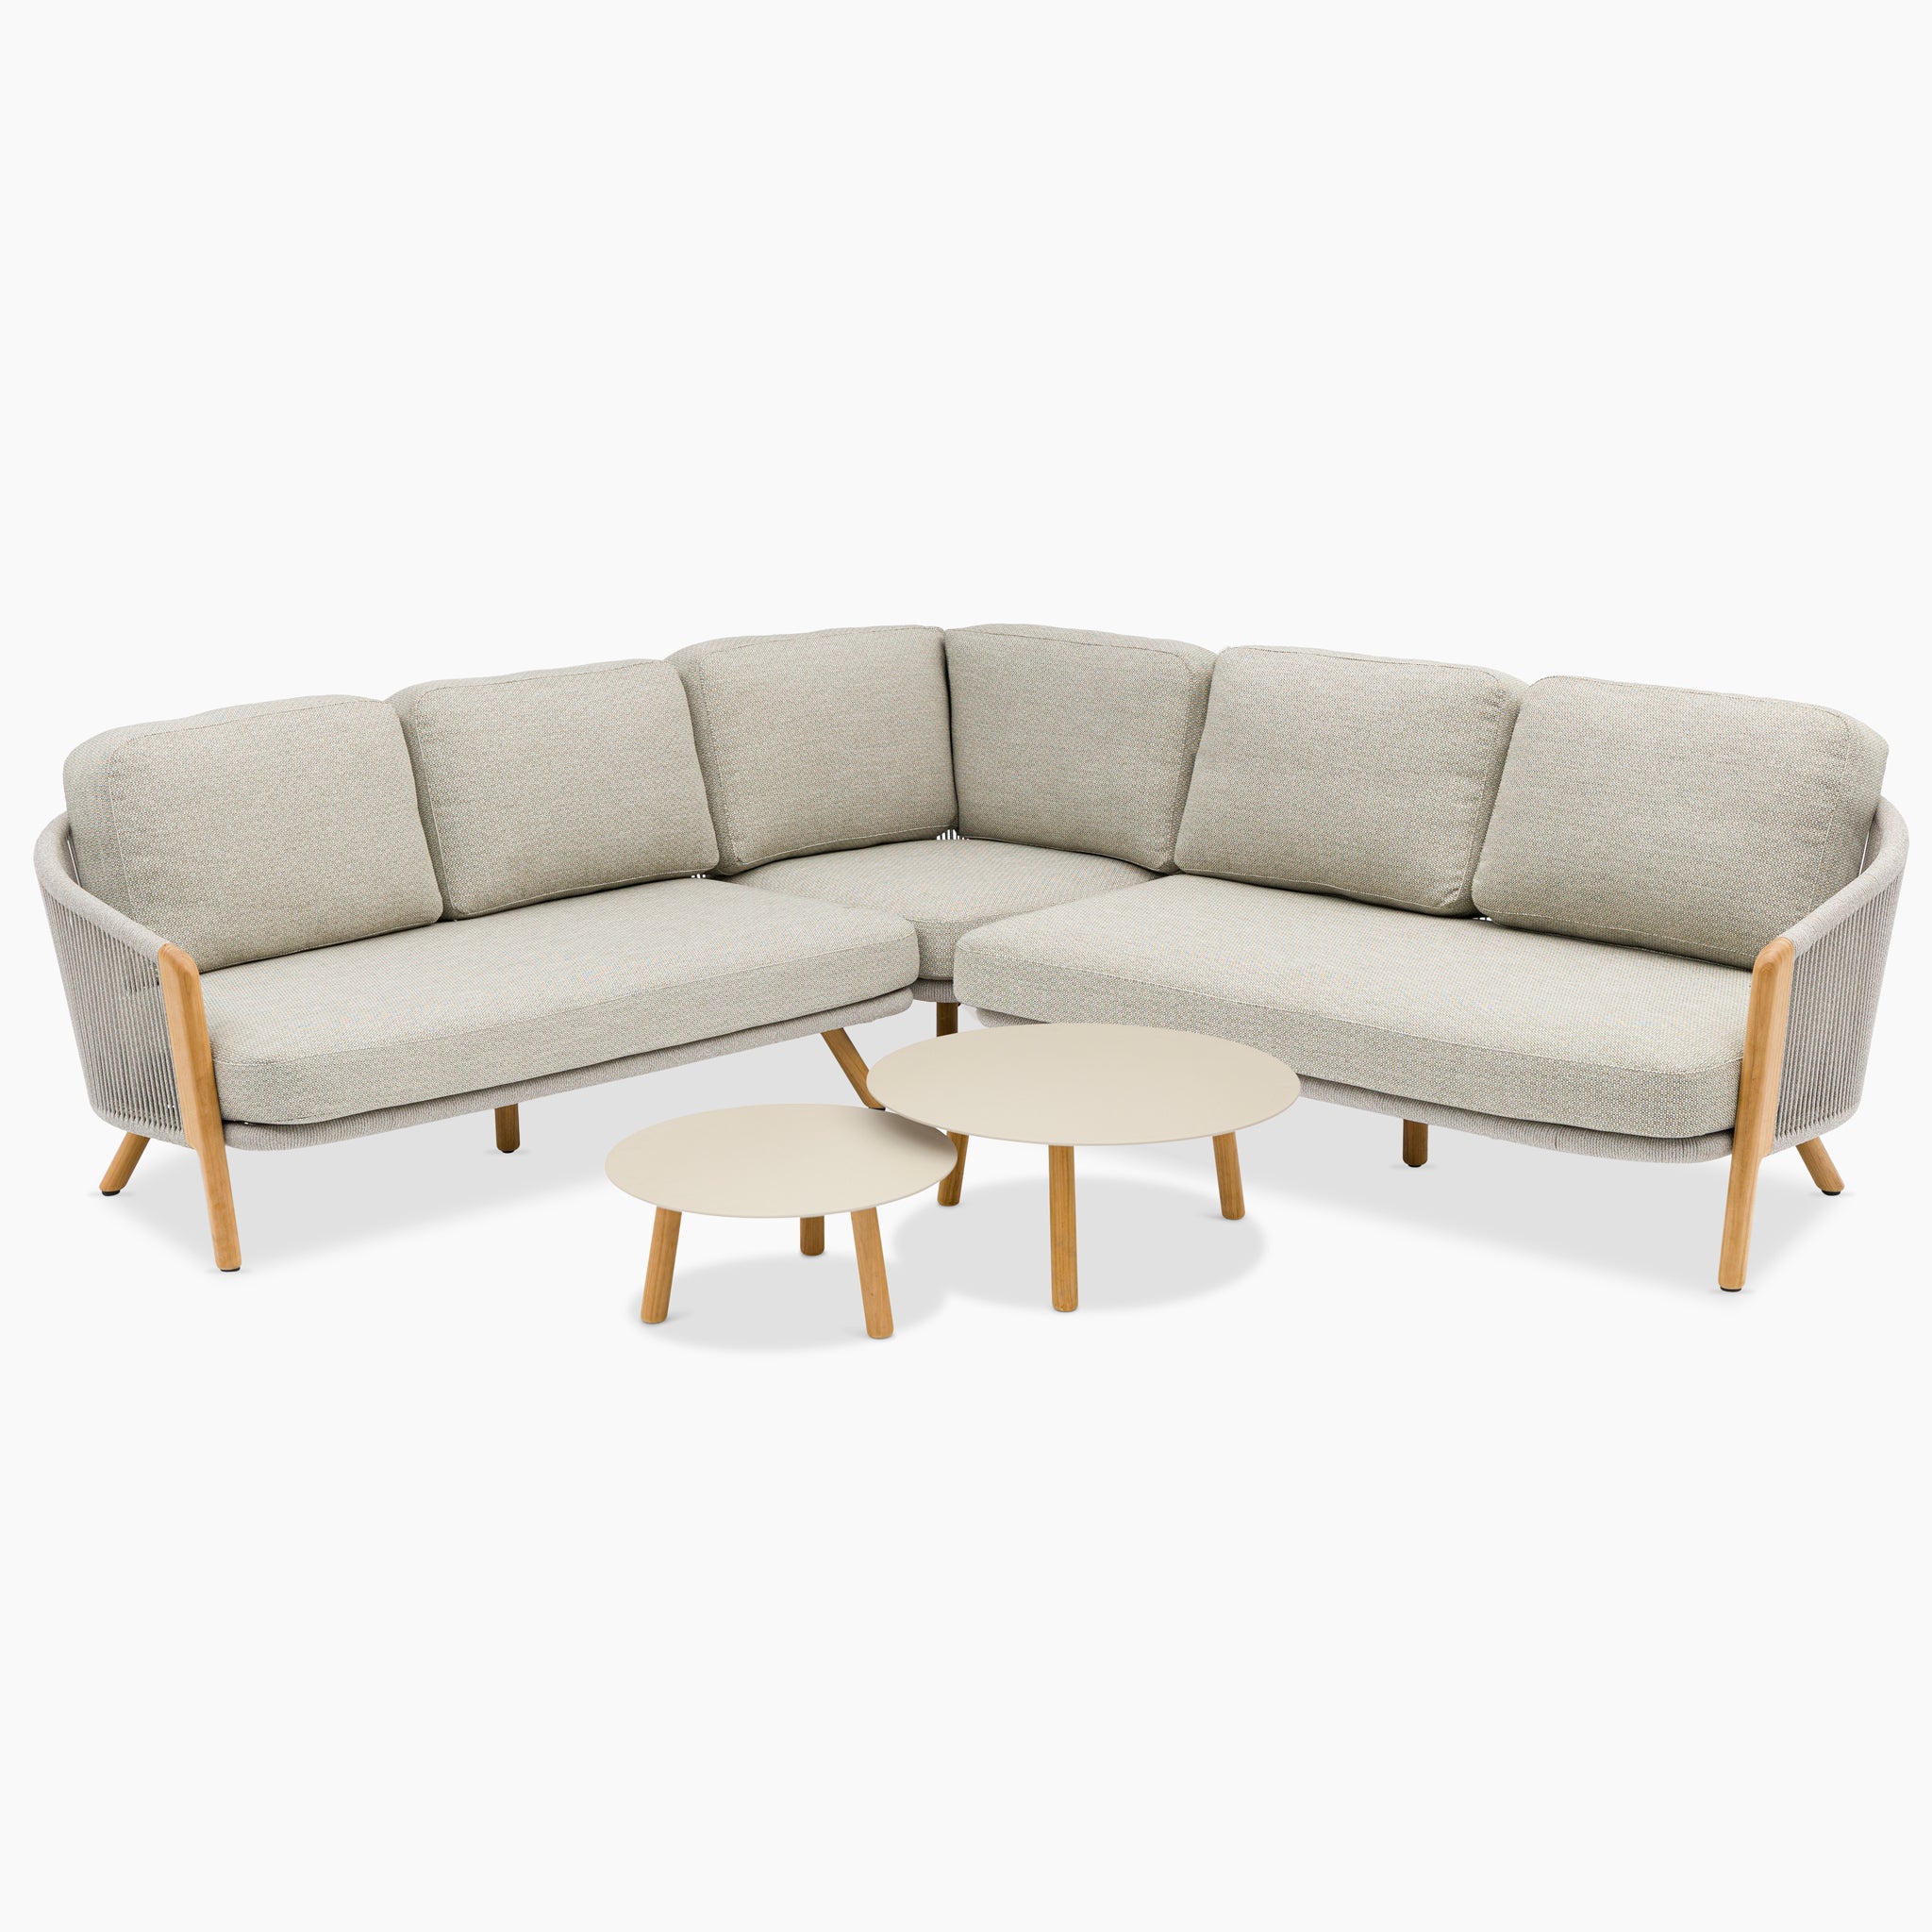 Merano Corner Group Set with Coffee Table in Latte